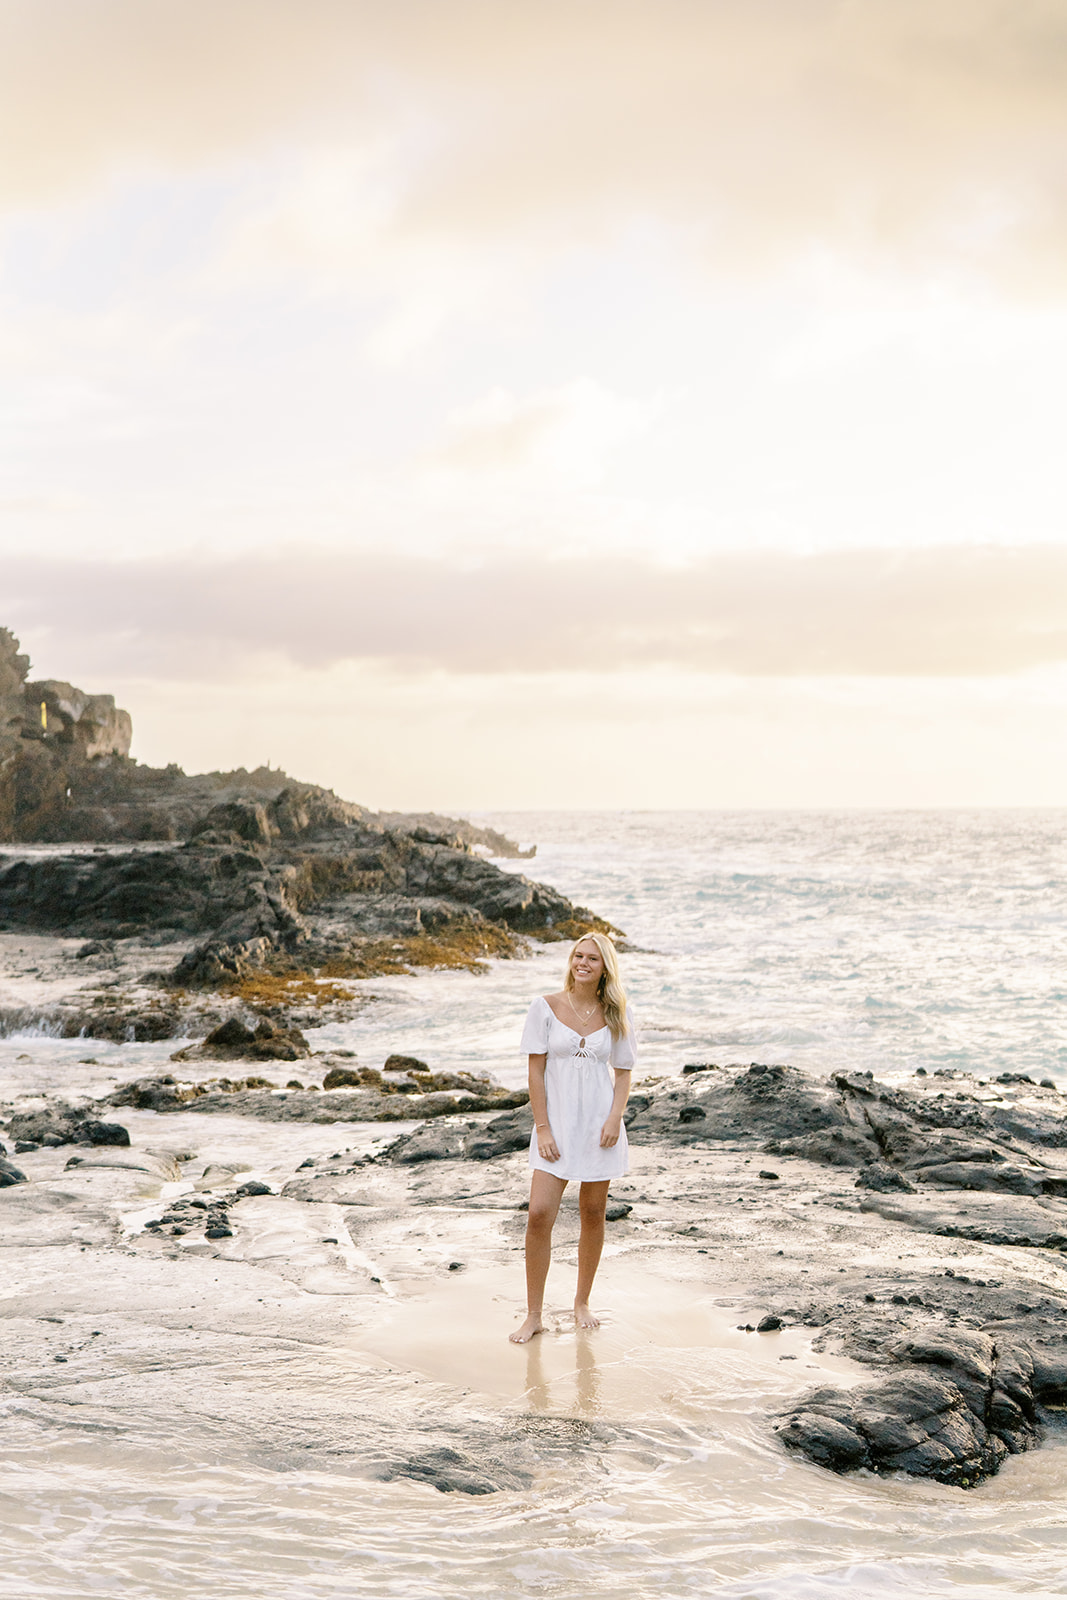 Woman standing on a rocky shoreline at sunset captured by Hawaii senior portrait photographer Megan Moura